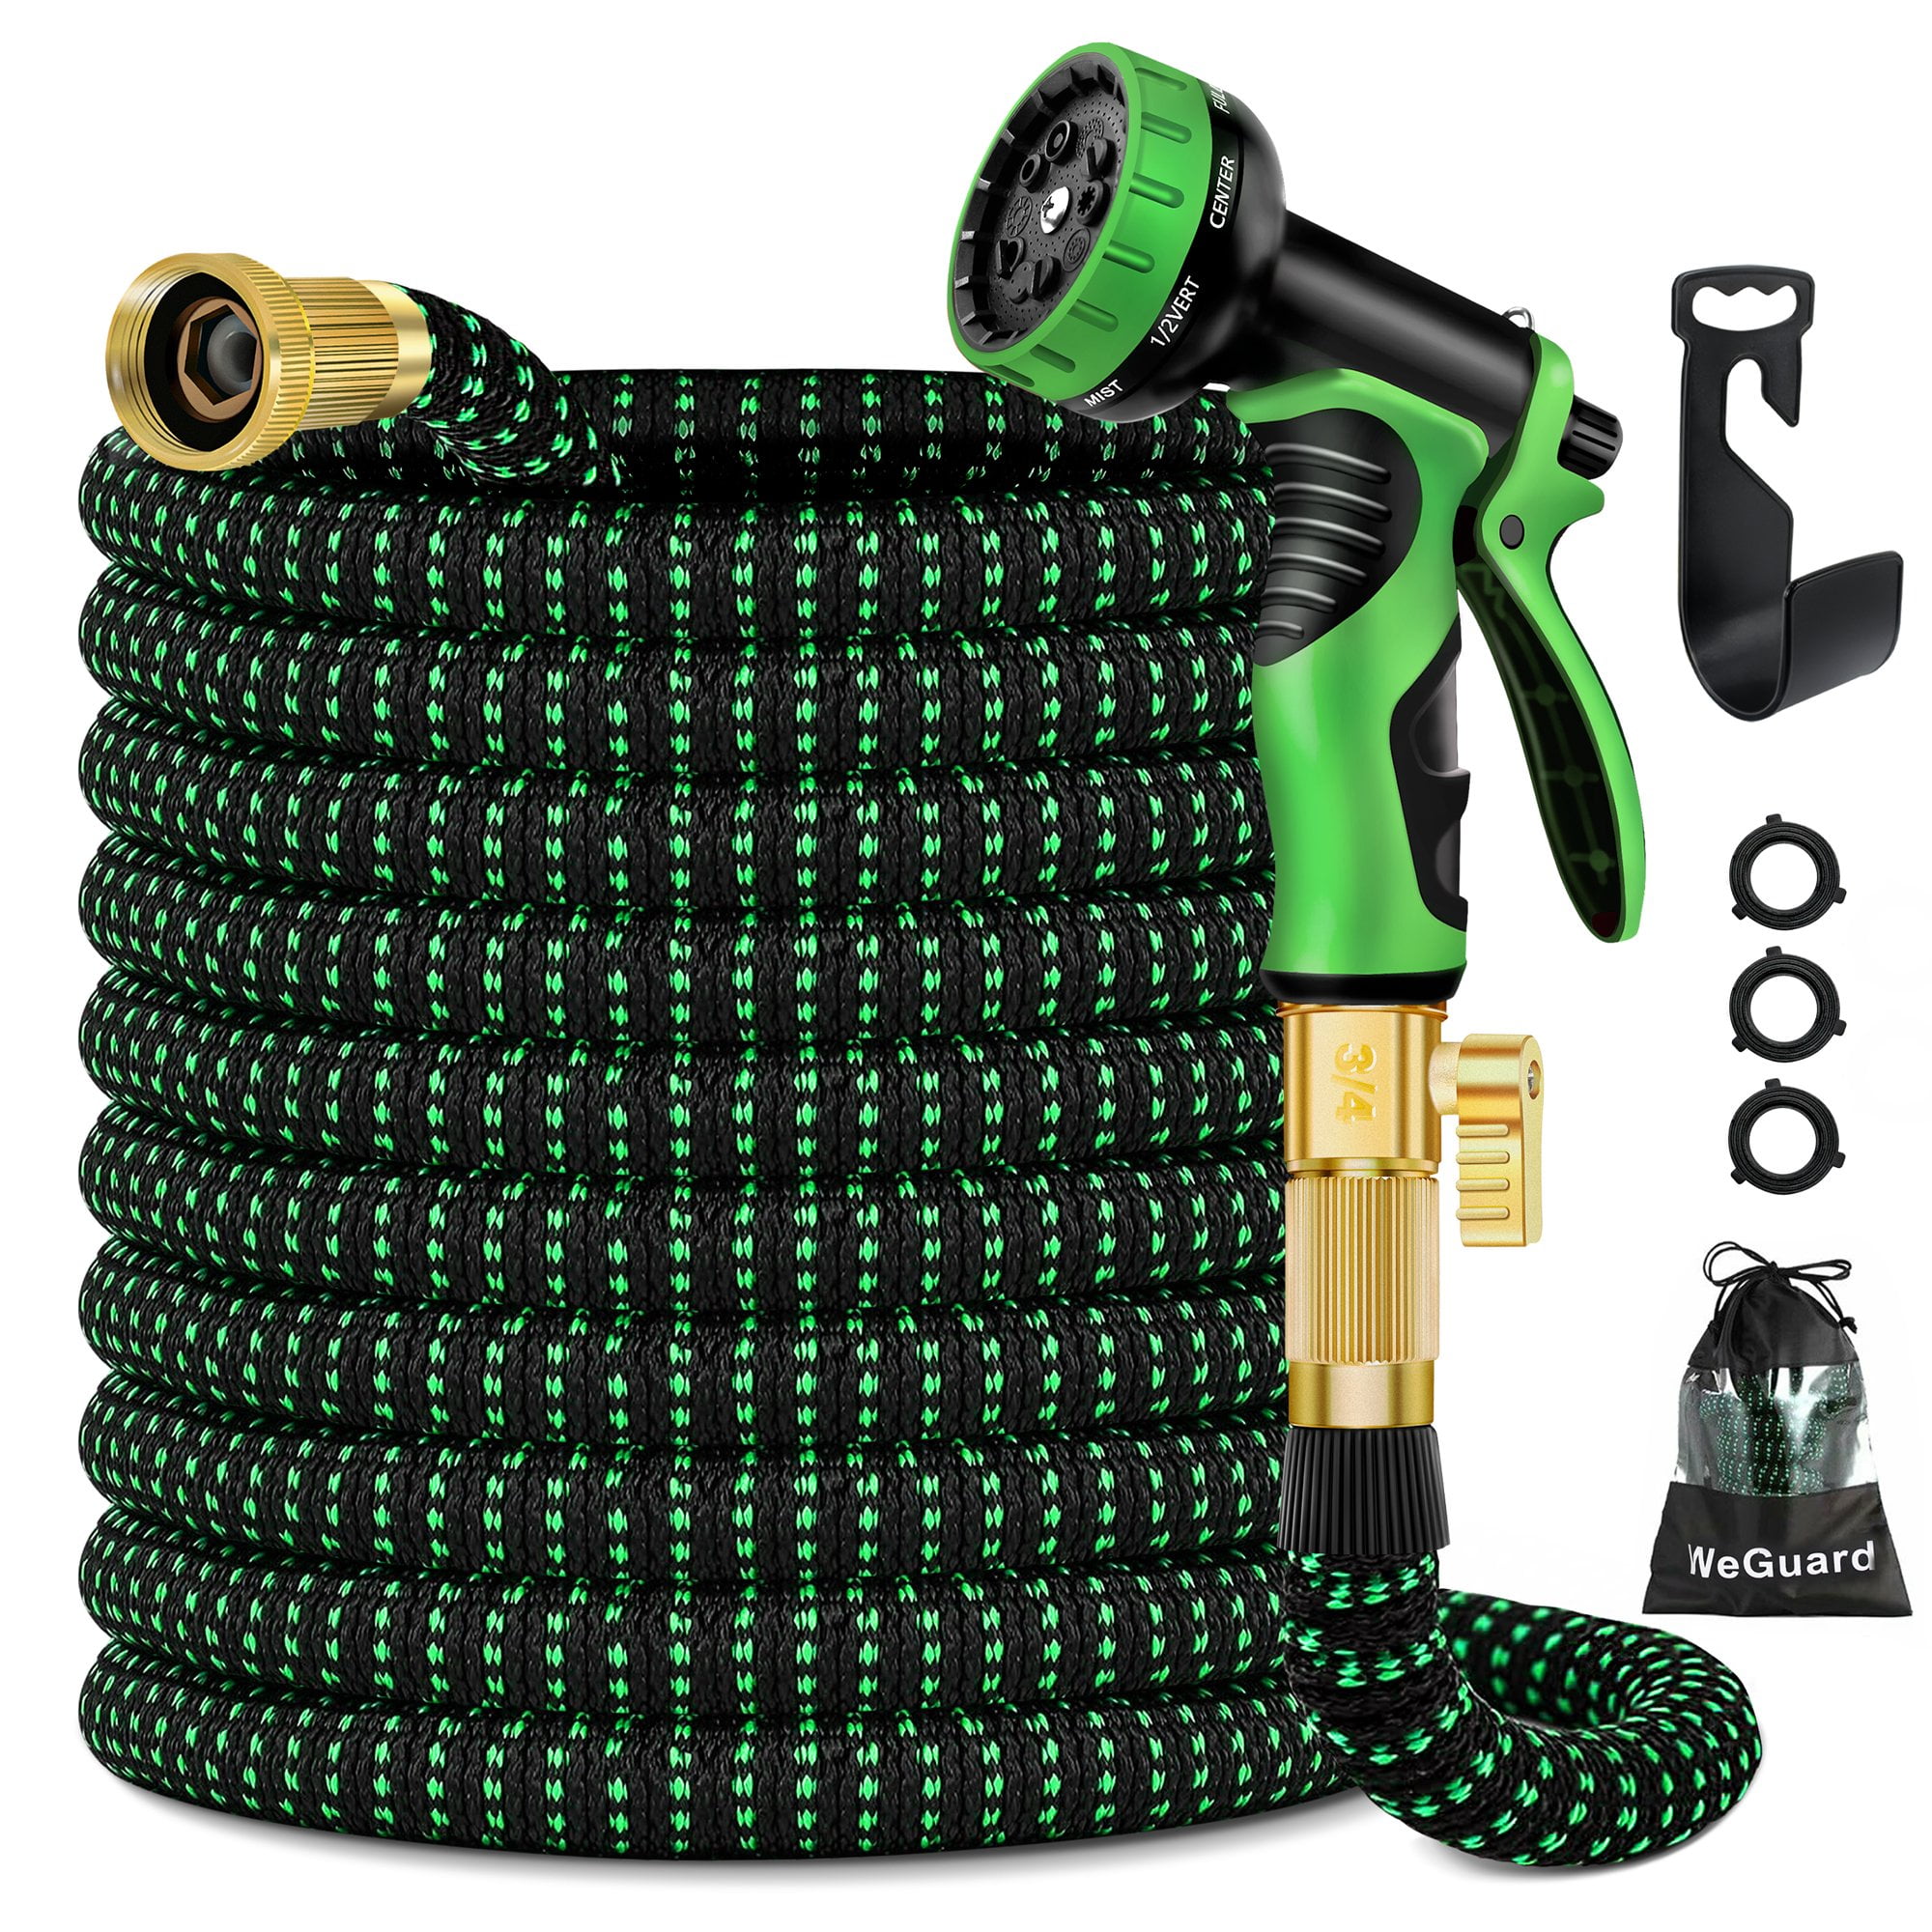 Superior Strength 3750D Garden Hoses with 3/4 Solid Connectors for Watering and Washing Lightweight Water Hose with 10 Function Nozzle SnugNiture 100ft Expandable Garden Hose 